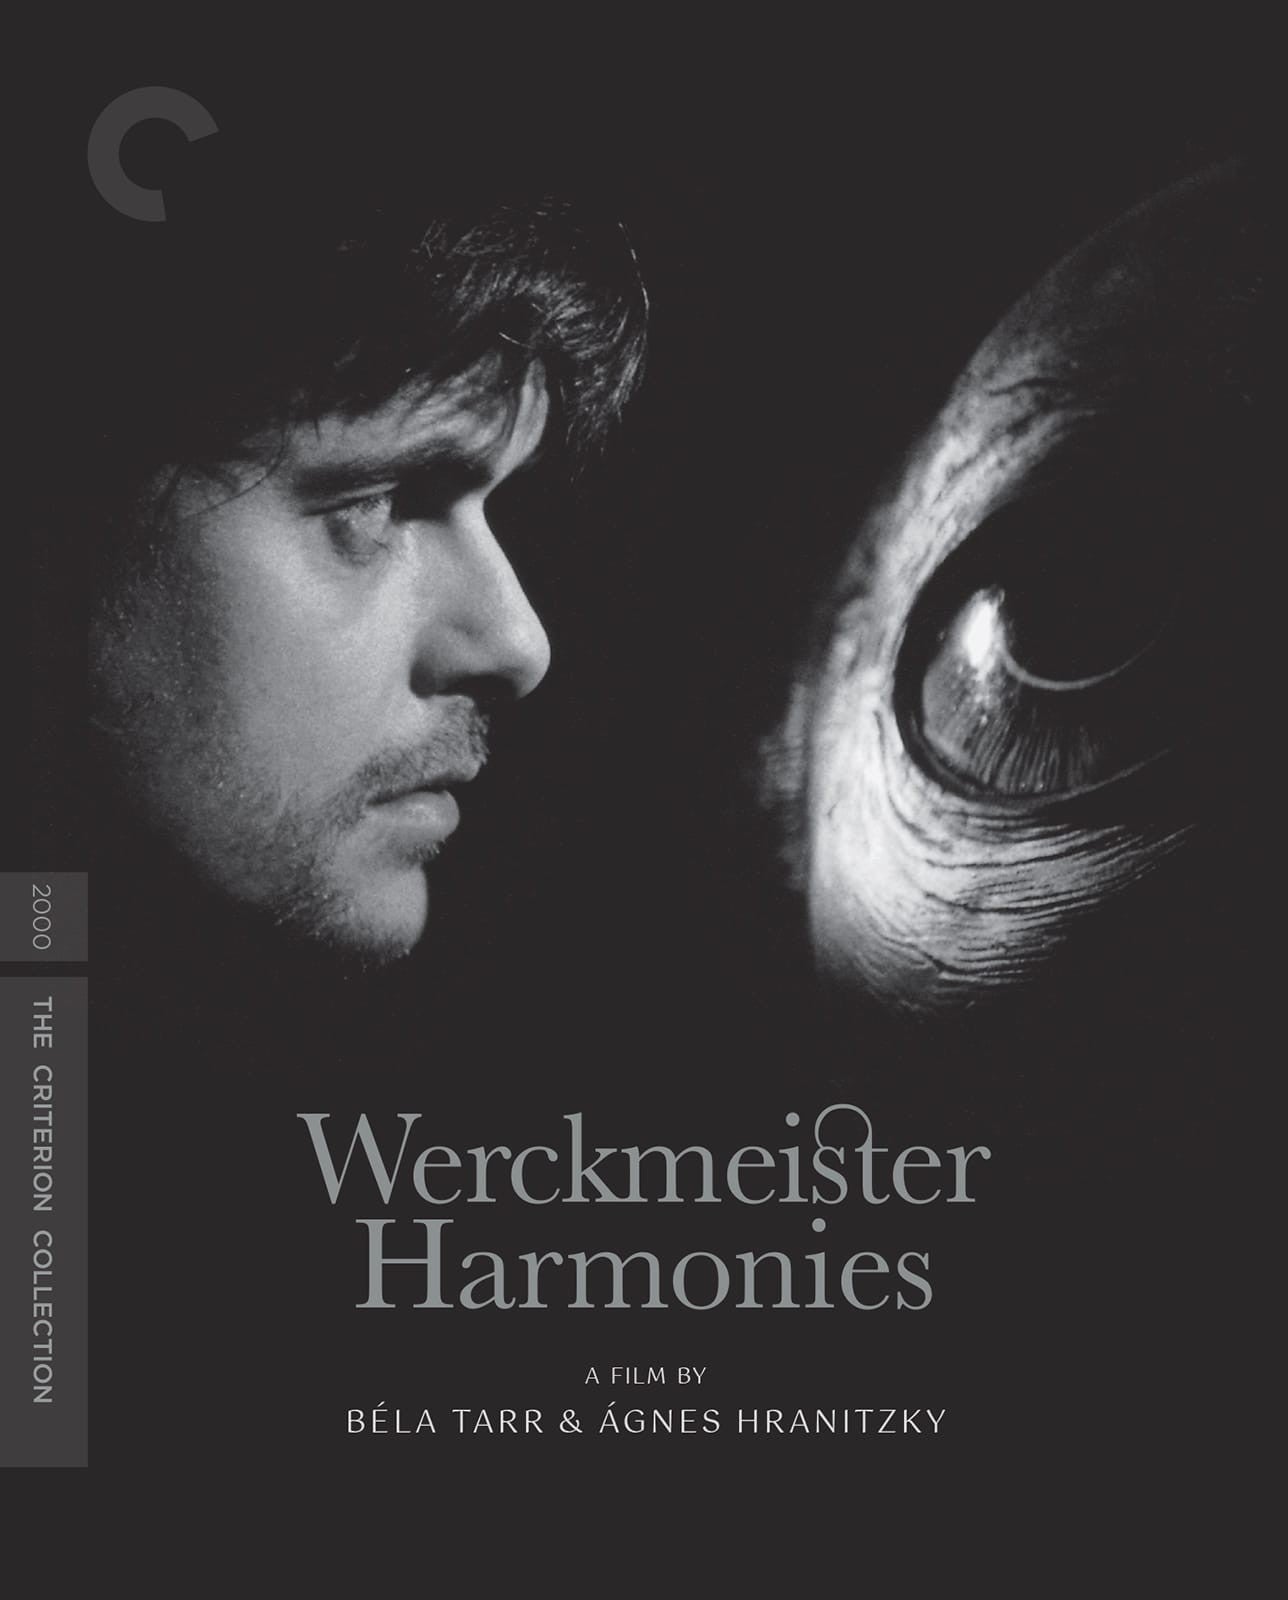 Werckmeister Harmonies The Criterion Collection Blu-Ray [PRE-ORDER]